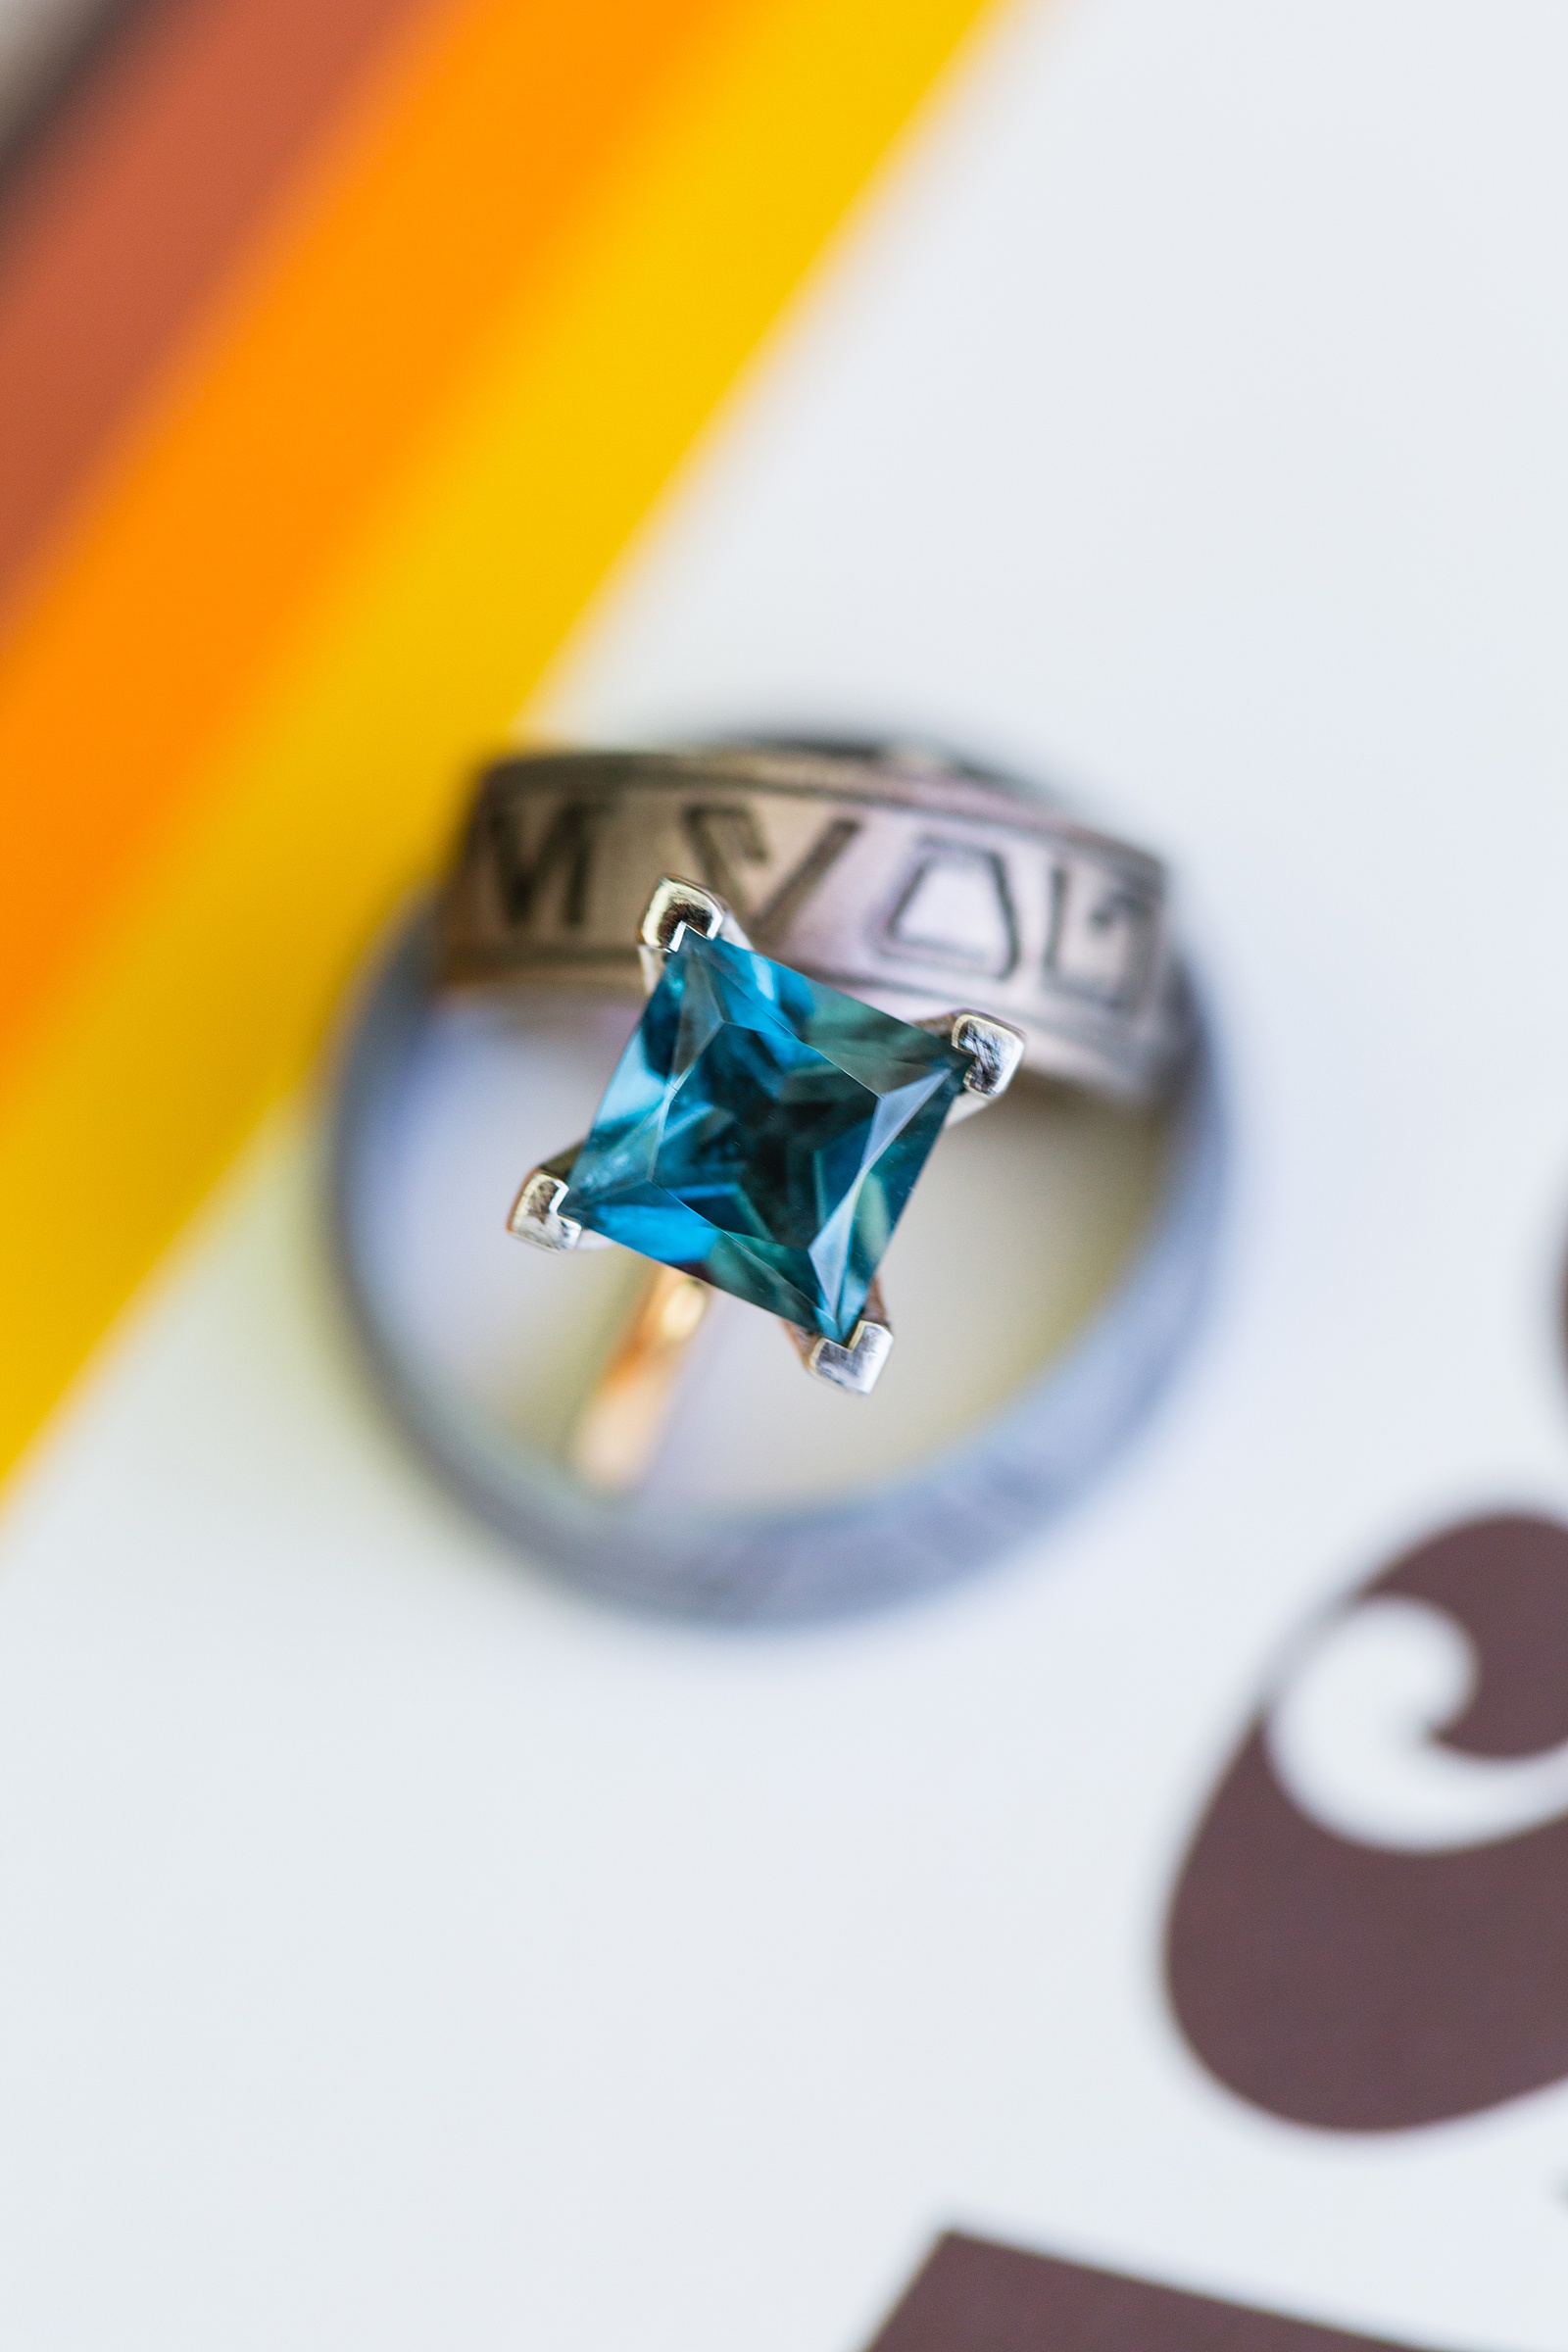 Bride's wedding day details of Star Wars wedding band by PMA Photography.